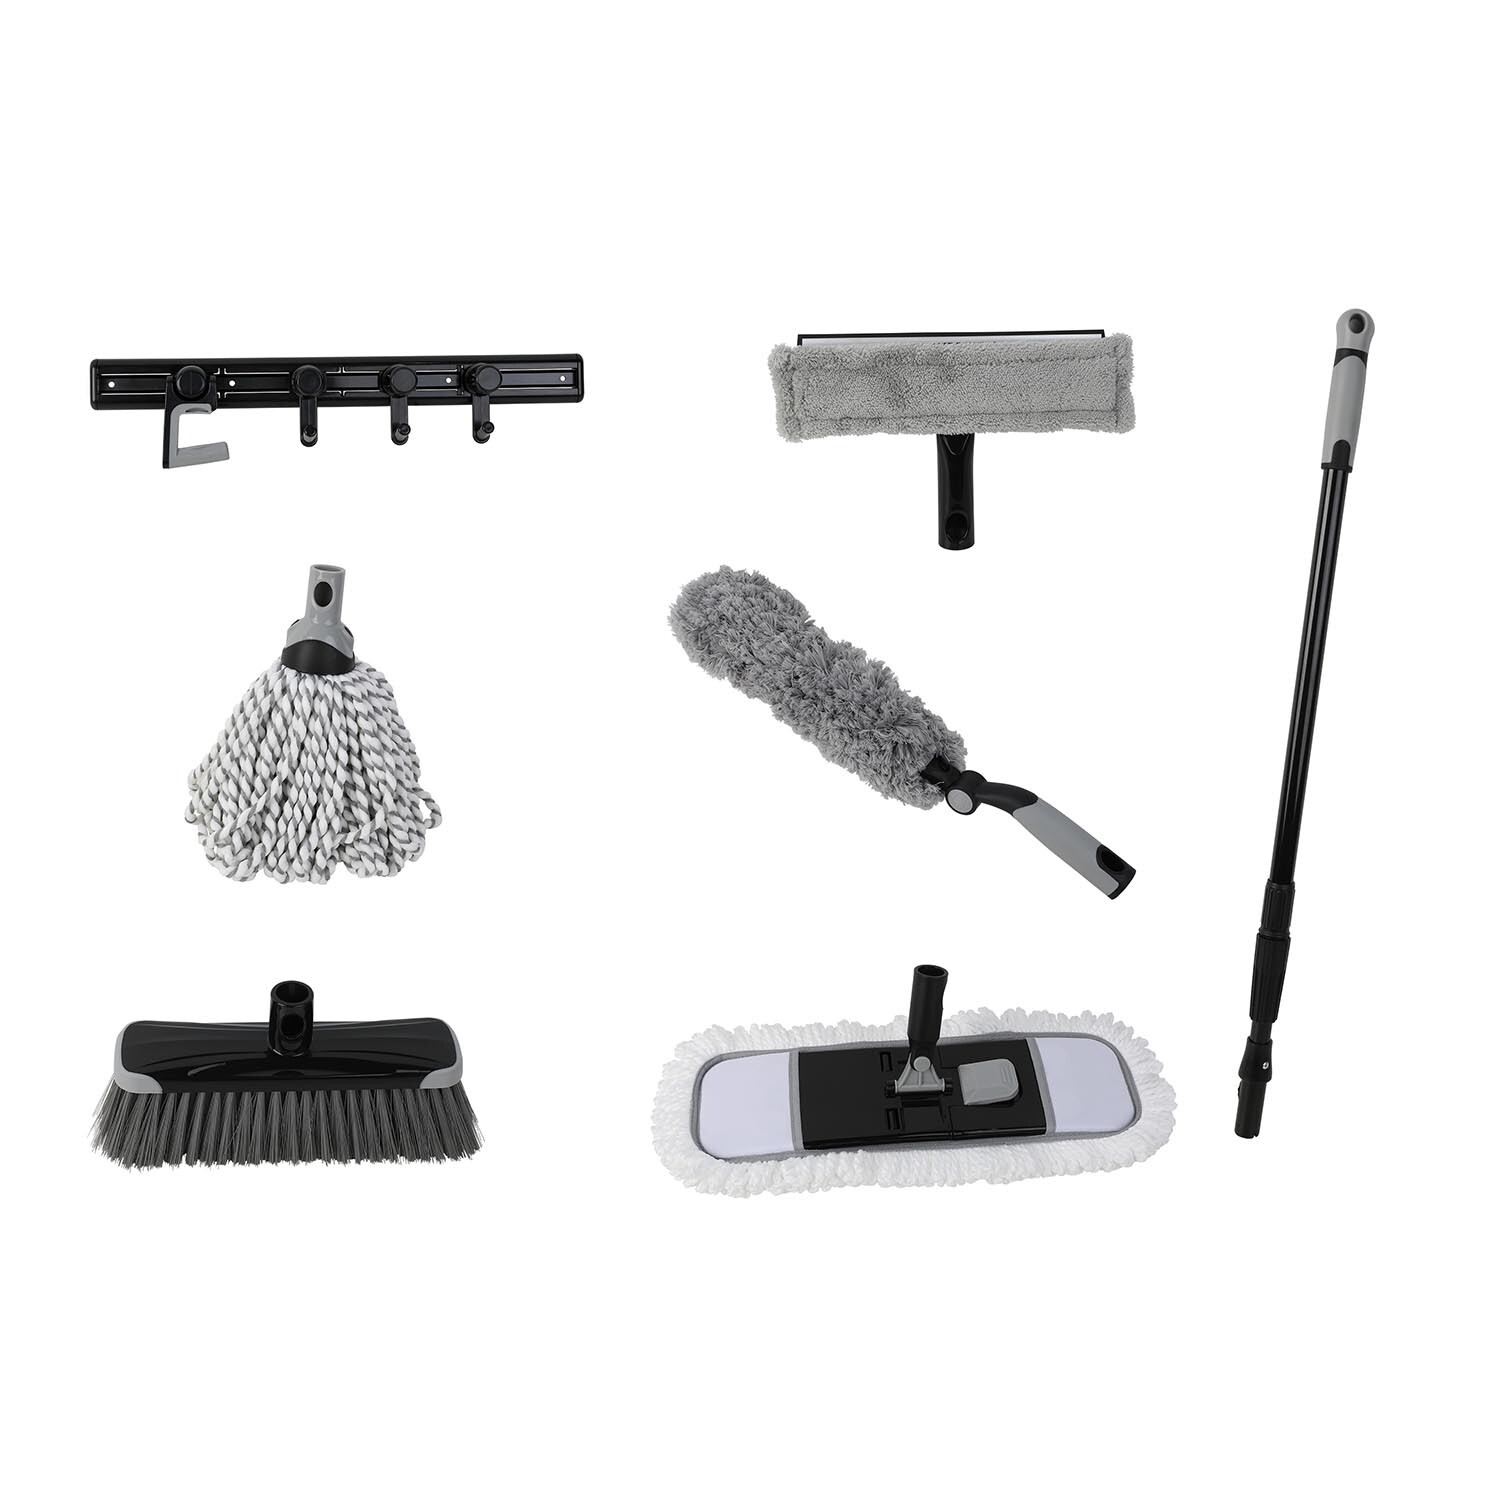 7 Piece Cleaning Set - Grey Image